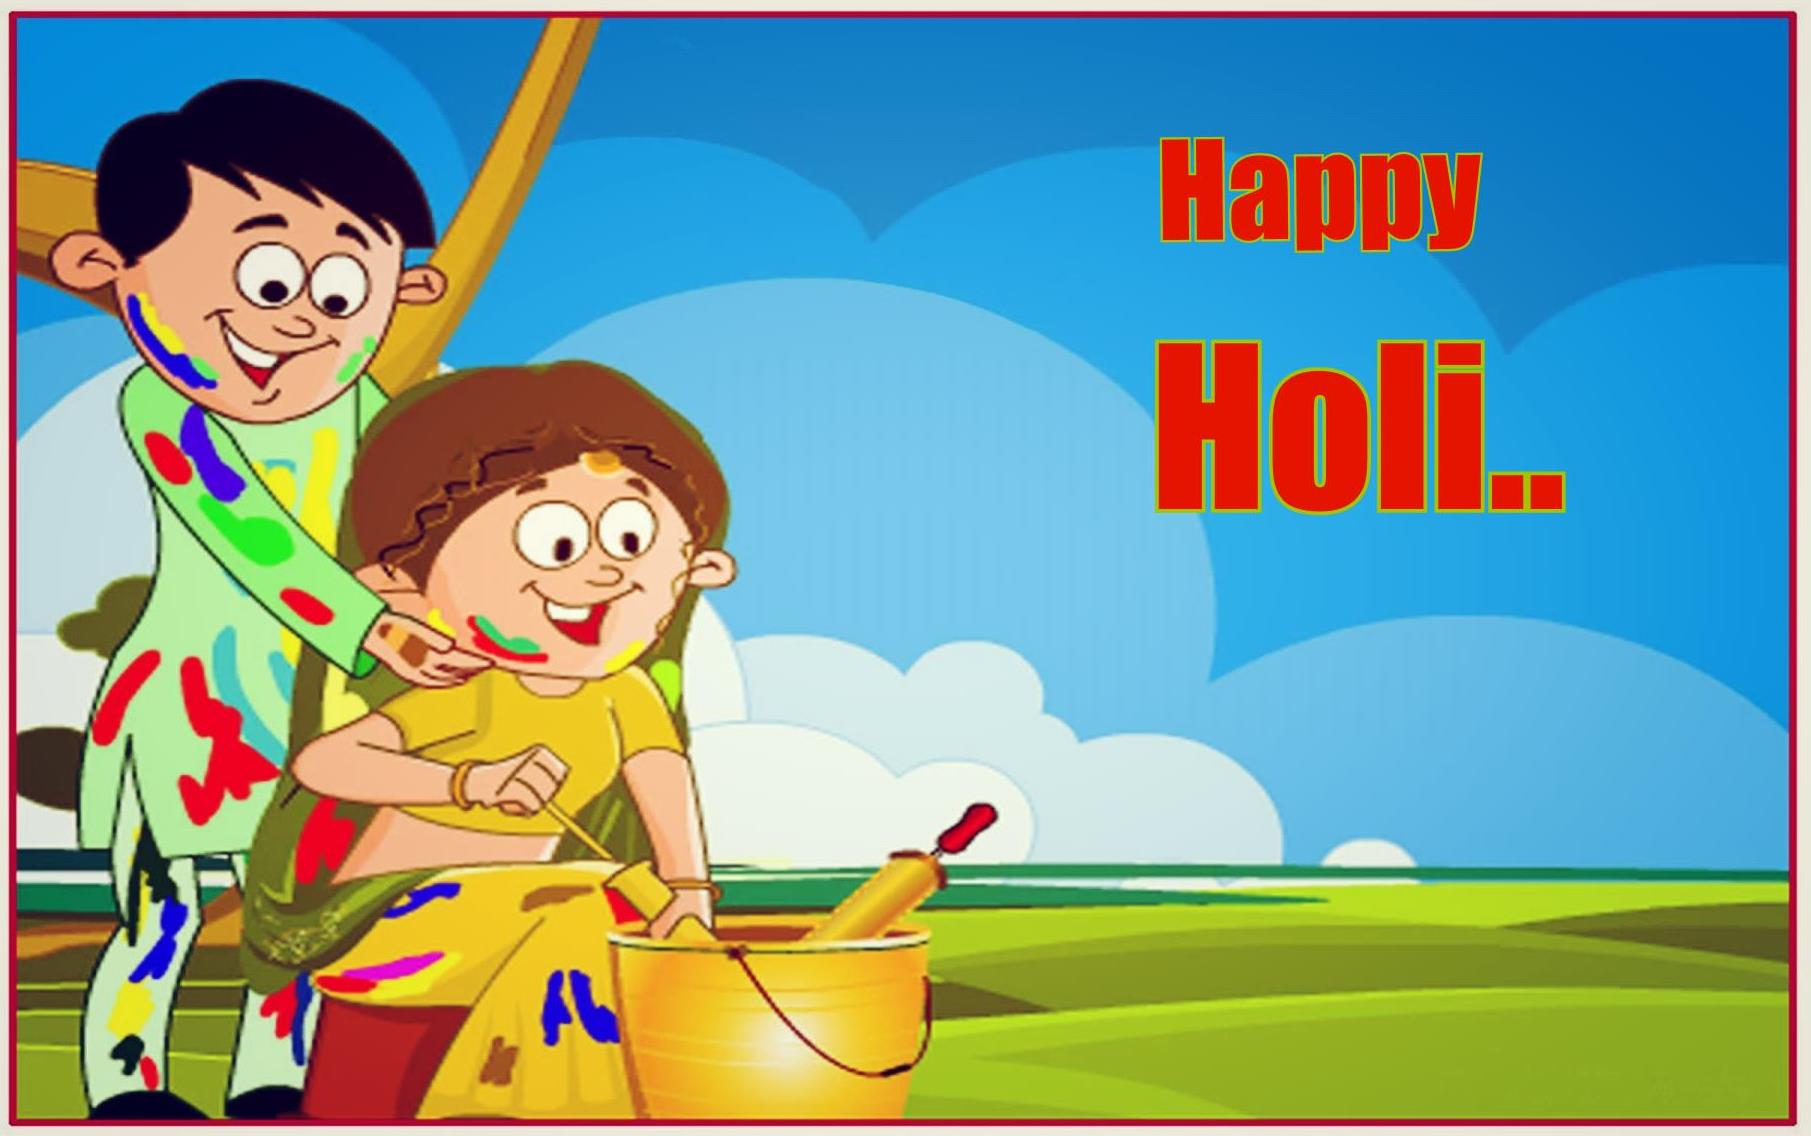 Happy Holi Wishes HD Wallpapers Download - Let Us Publish